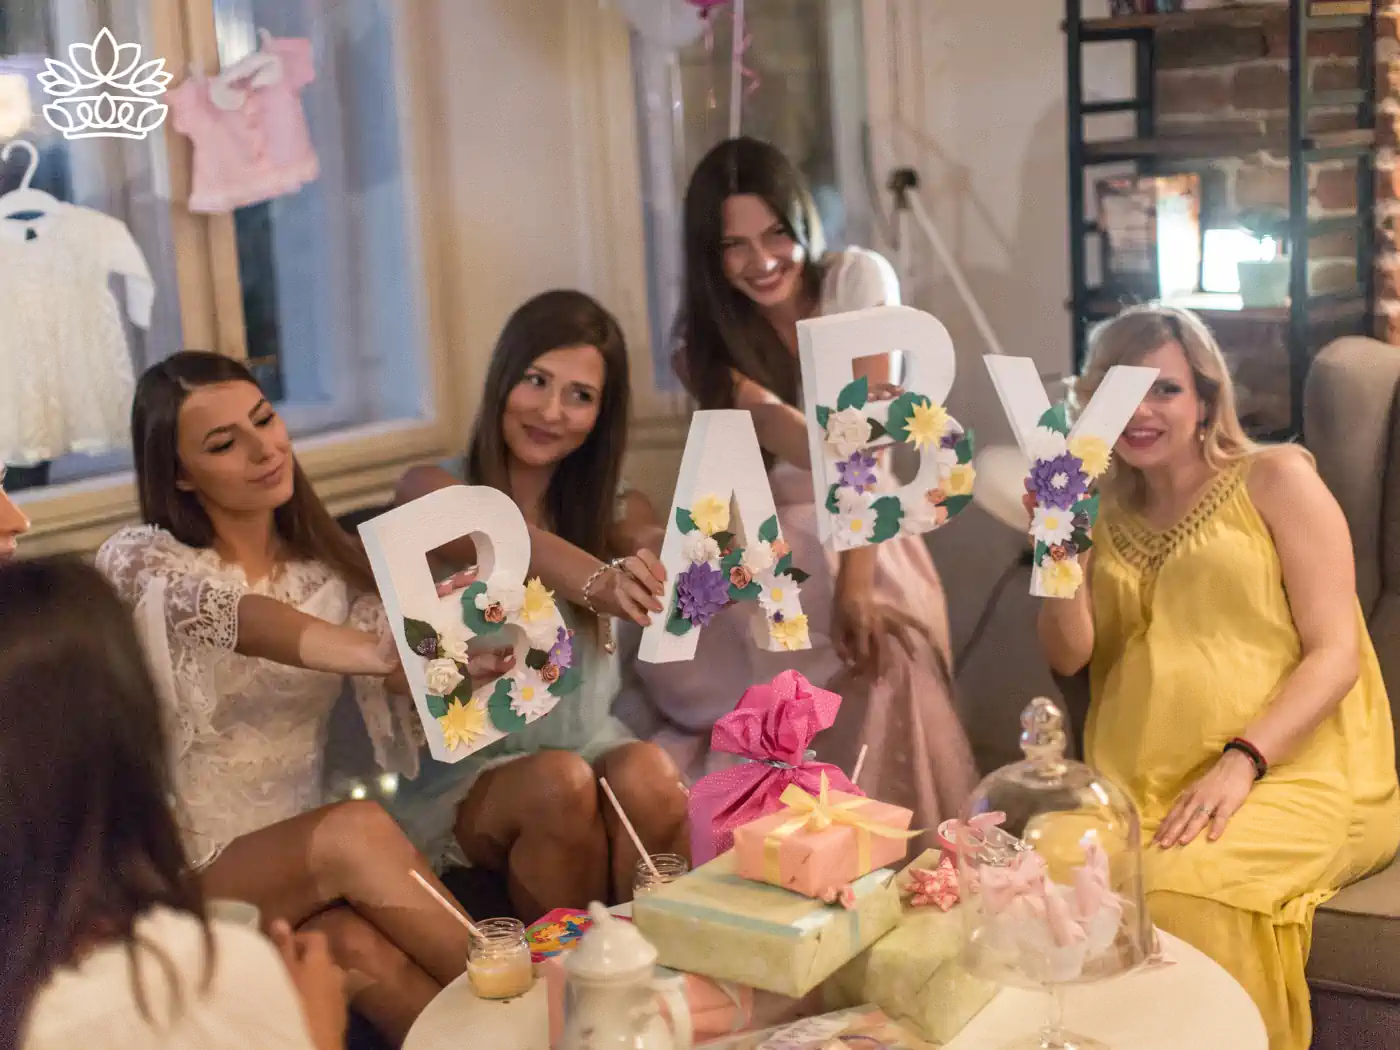 Group of women holding large letters spelling "BABY" decorated with colourful flowers, enjoying a baby shower celebration. Fabulous Flowers and Gifts: Baby Shower Flowers Collection